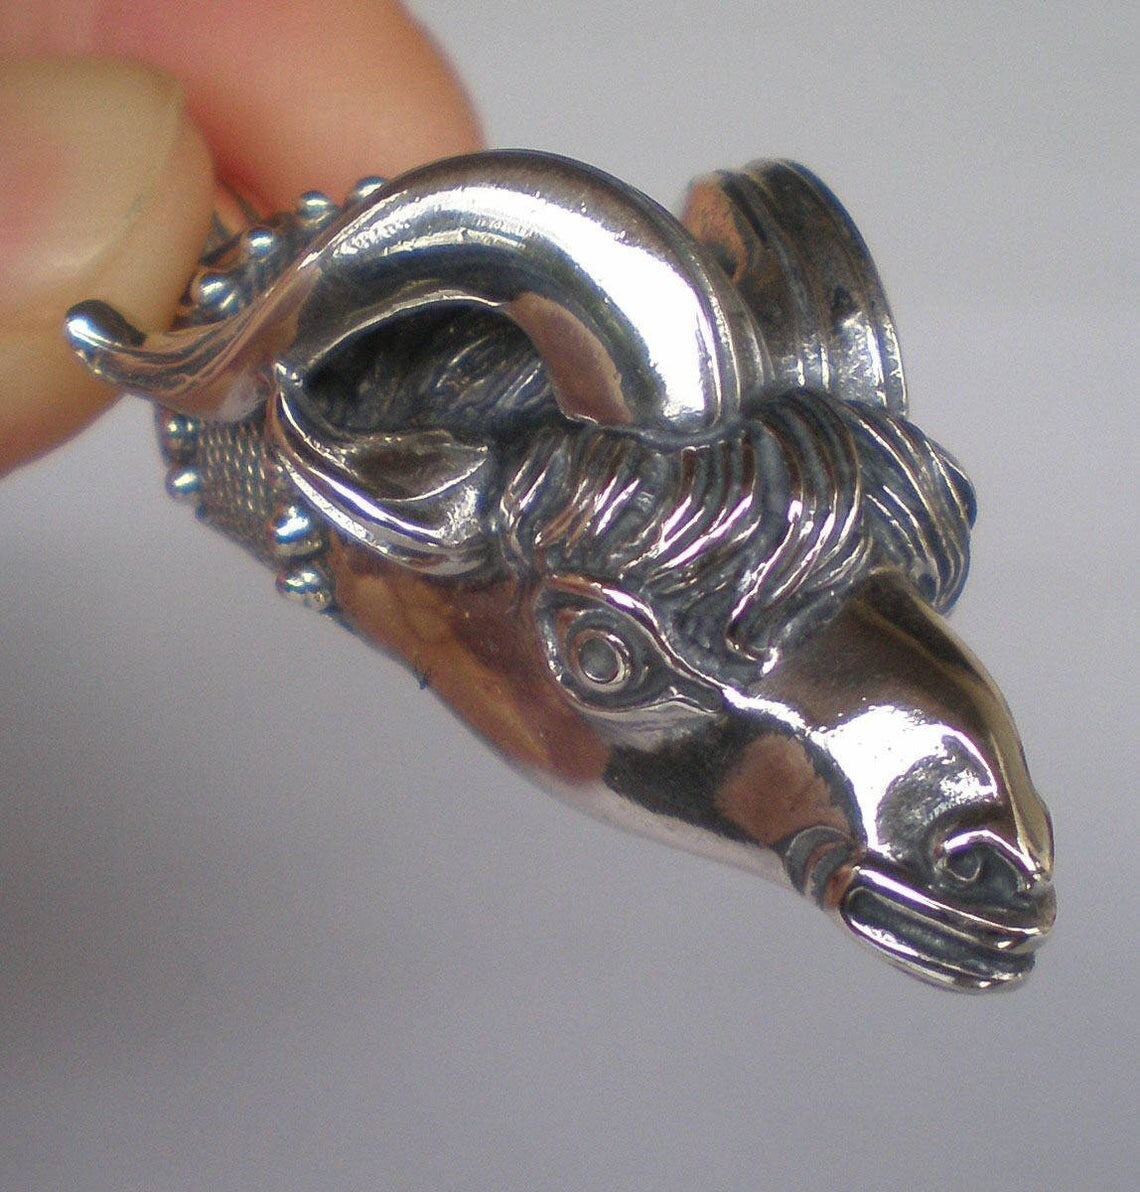 Ram Head - Ancient Greek Symbol of authority, nobility, virility, fertility, power and leadership - Pendant - 925 Sterling Silver